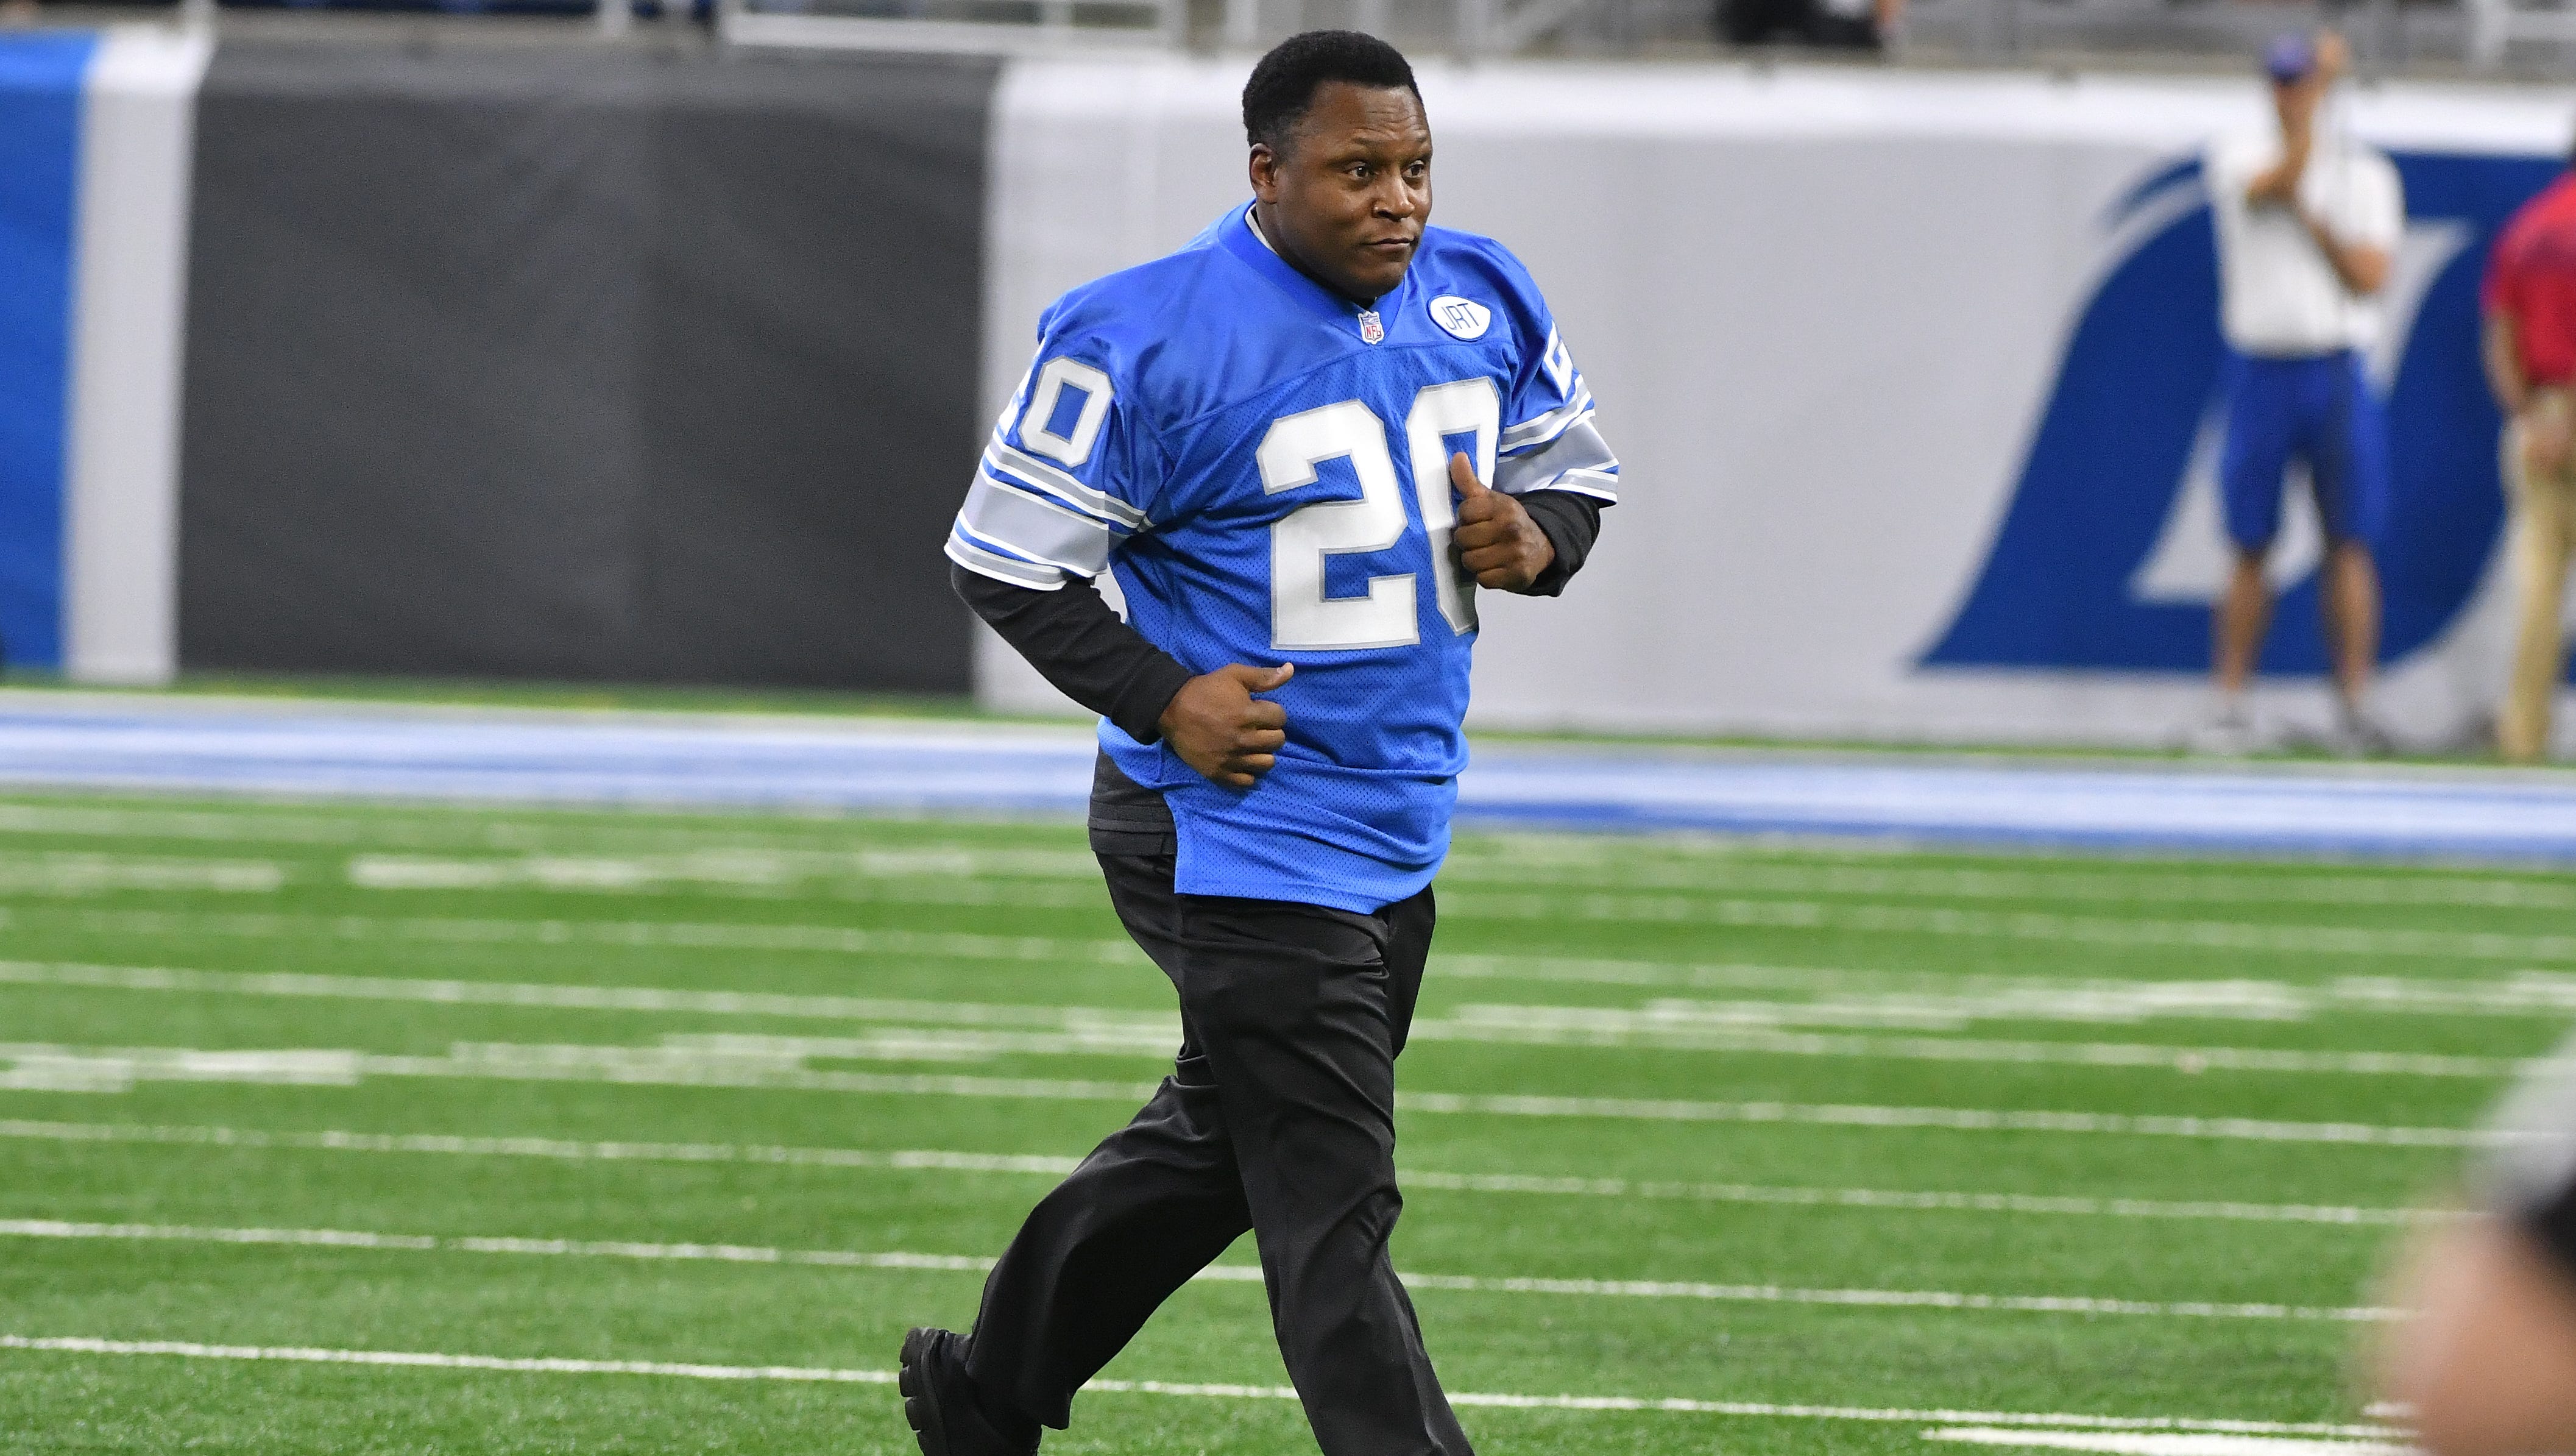 Lions great Barry Sanders leaves the field after being an honorary captain during the coin toss before Detroit and the L.A. Rams play at Ford Field on Sunday.